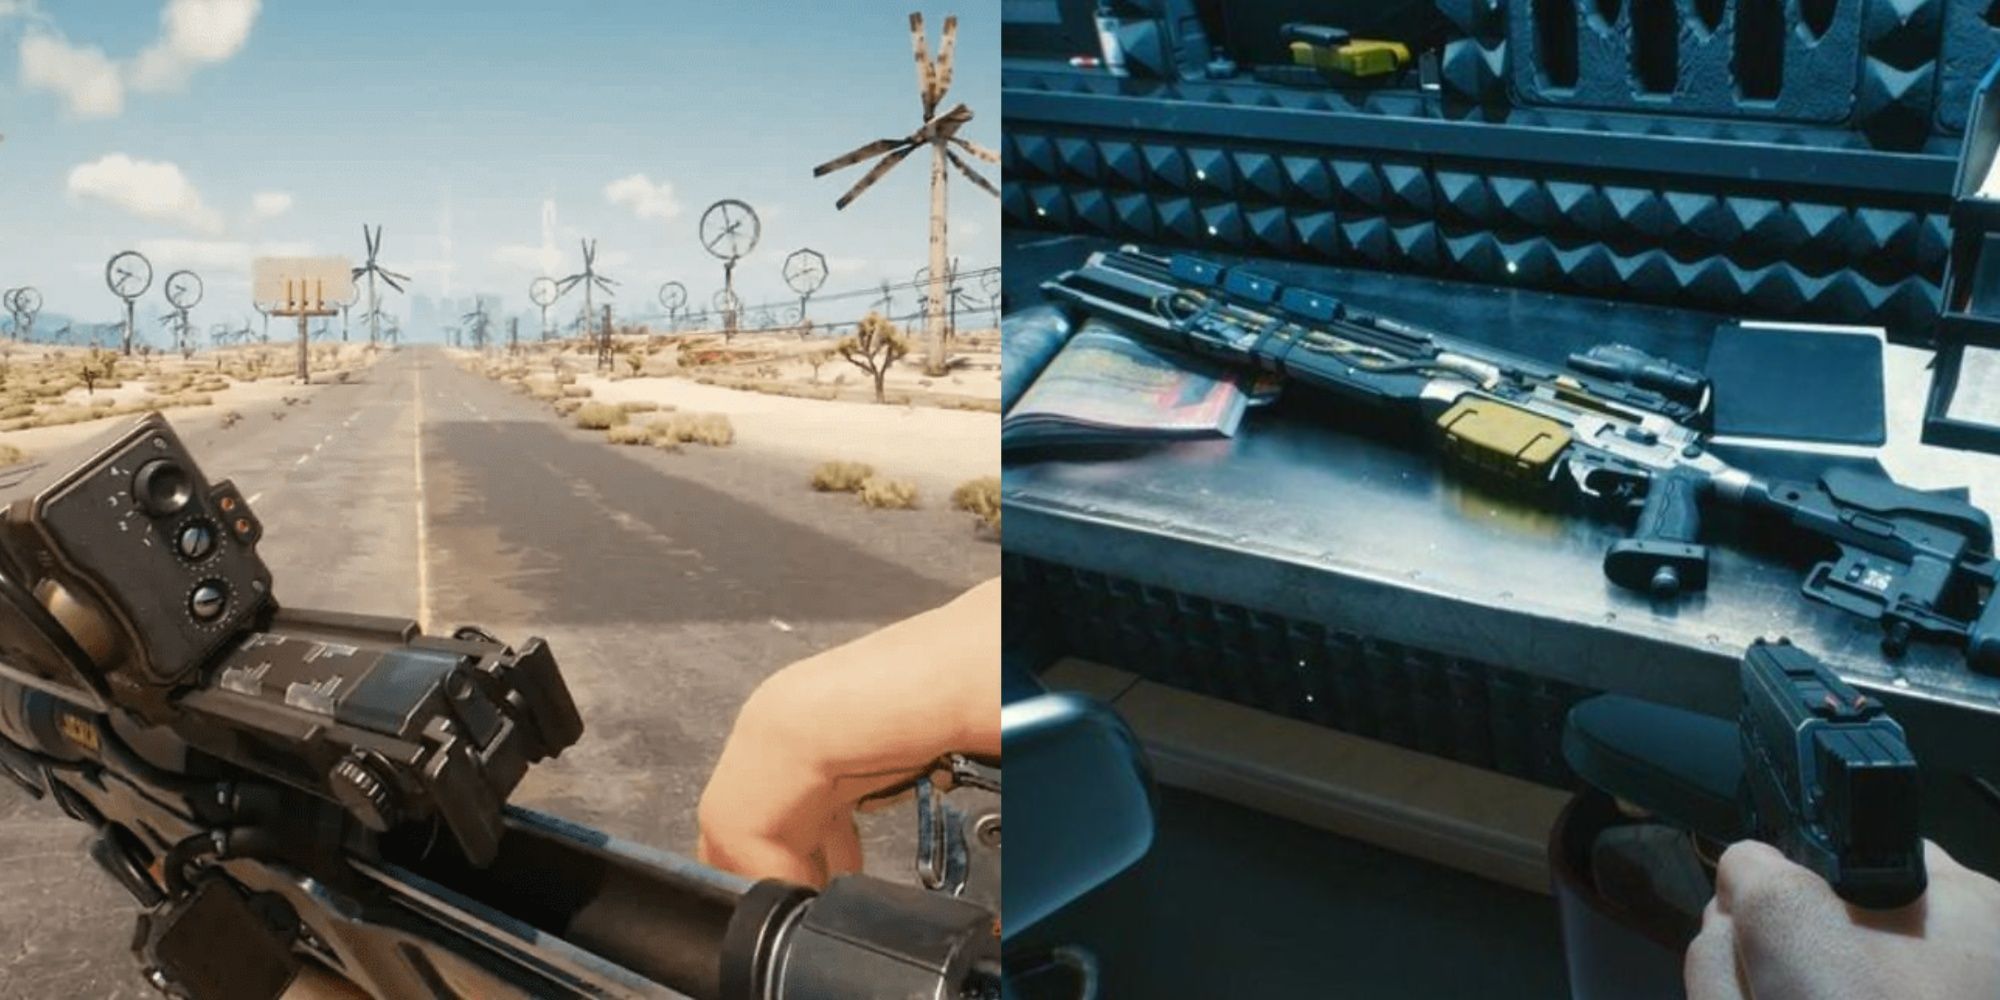 Cyberpunk 2077 using and finding a sniper rifle